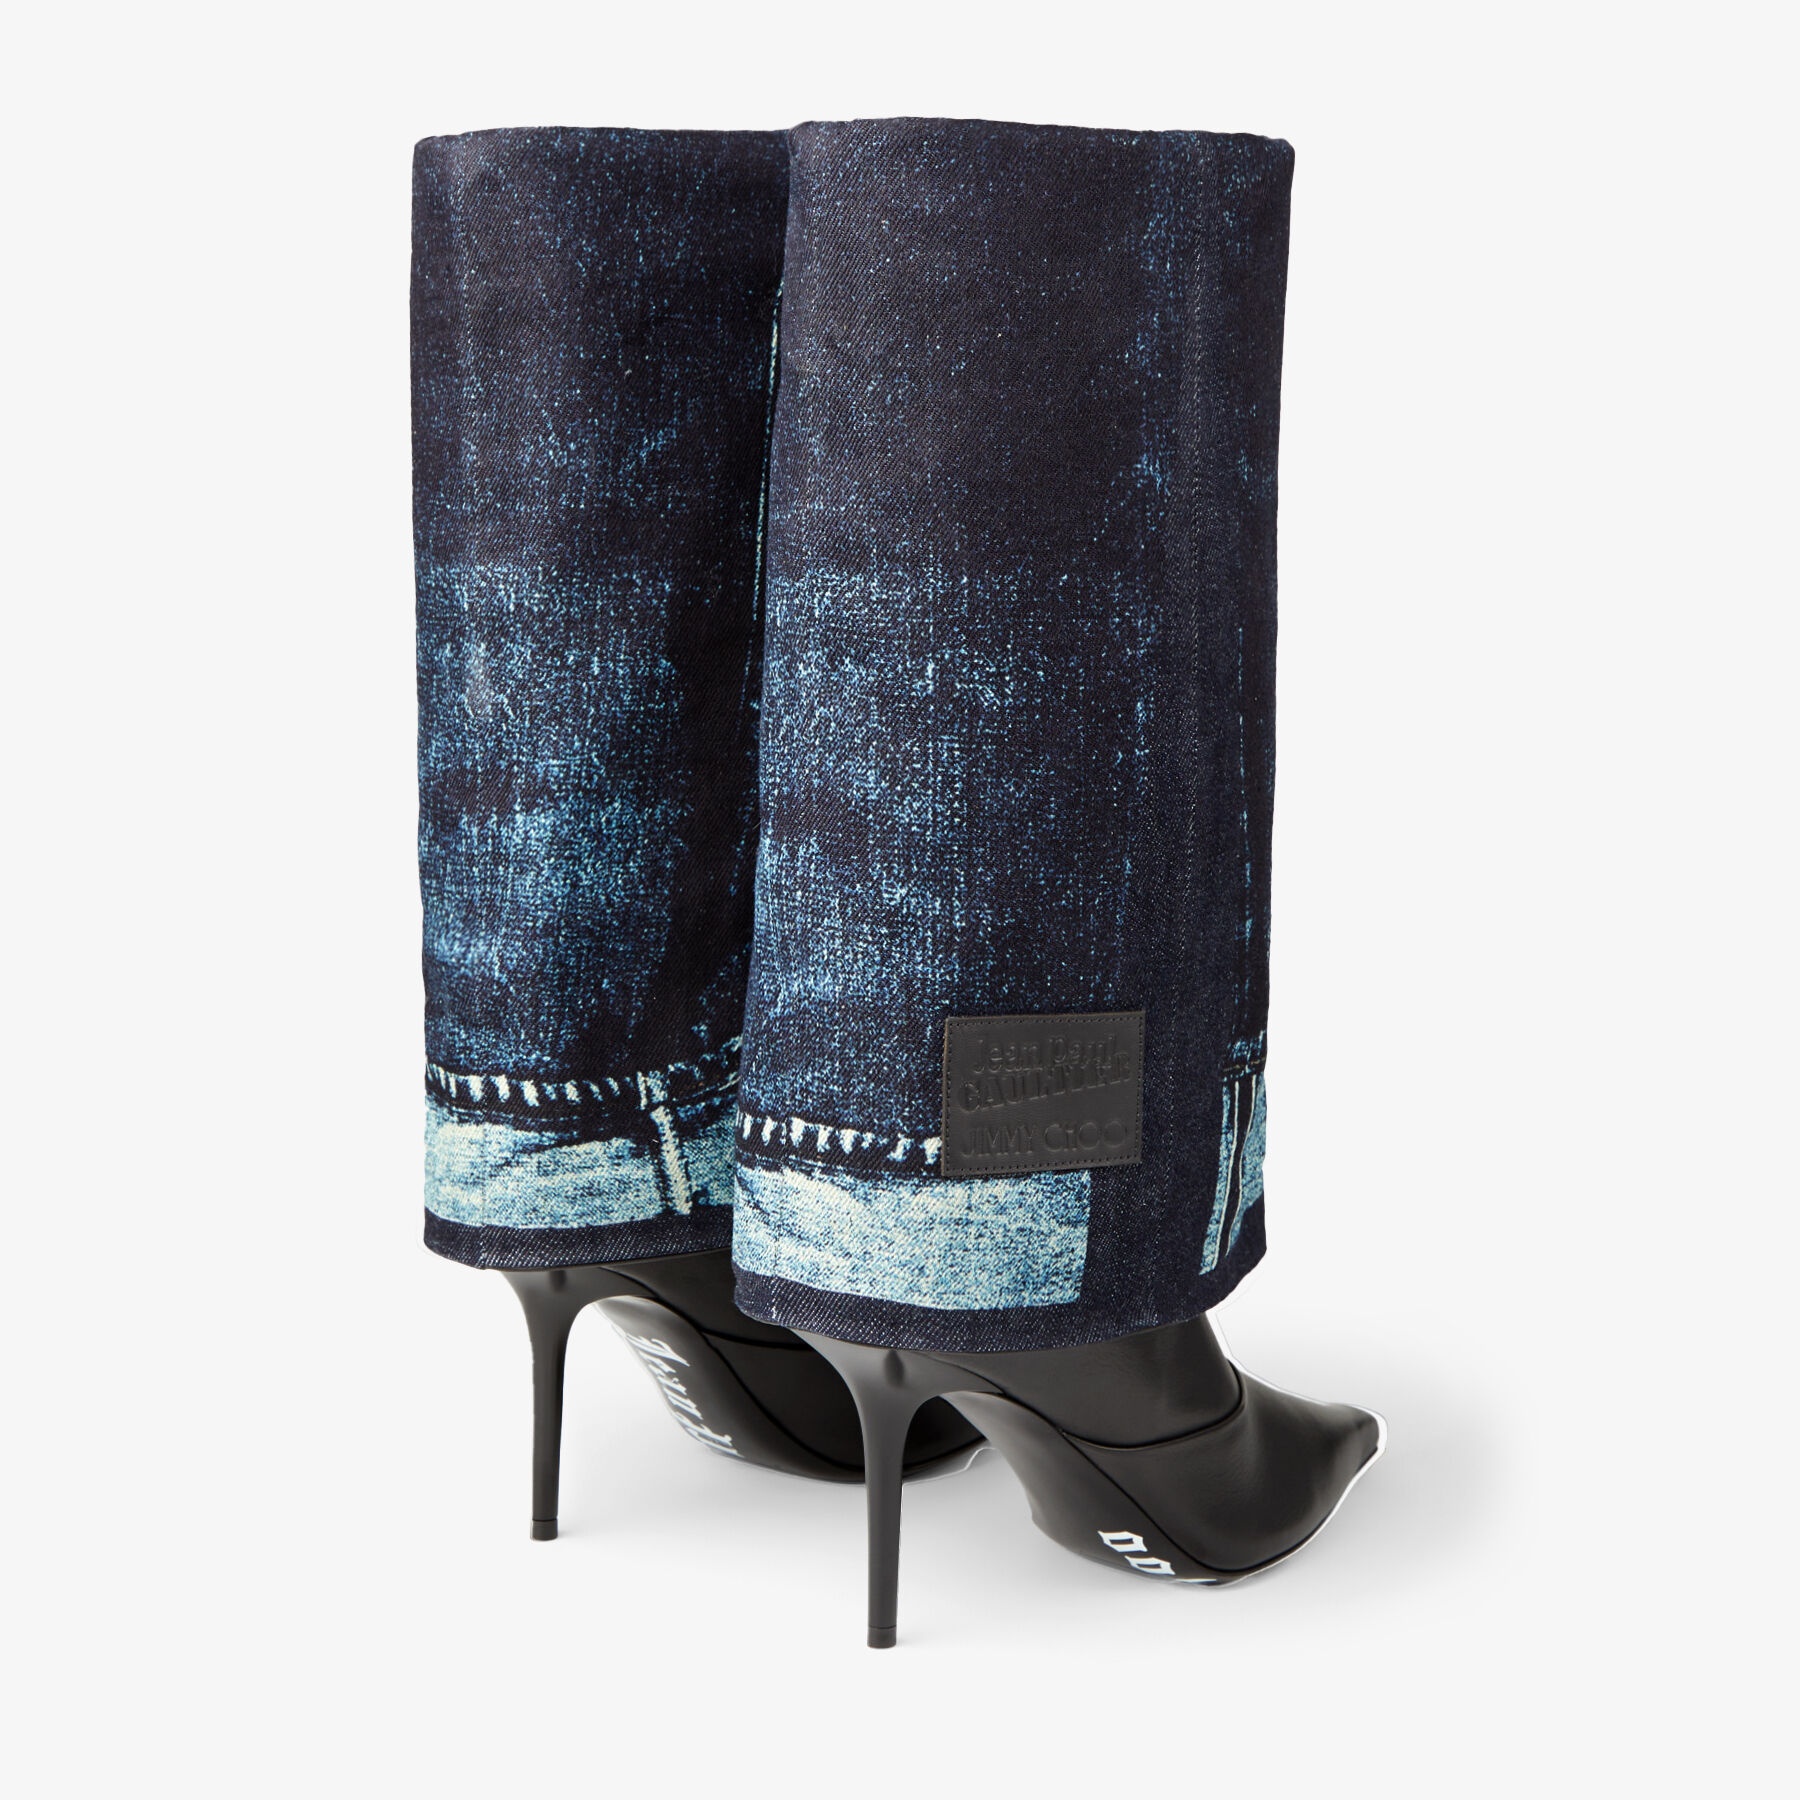 Jimmy Choo / Jean Paul Gaultier Cuff Over The Knee Boot 90
Black Calf Leather Over-The-Knee Boots wi - 5